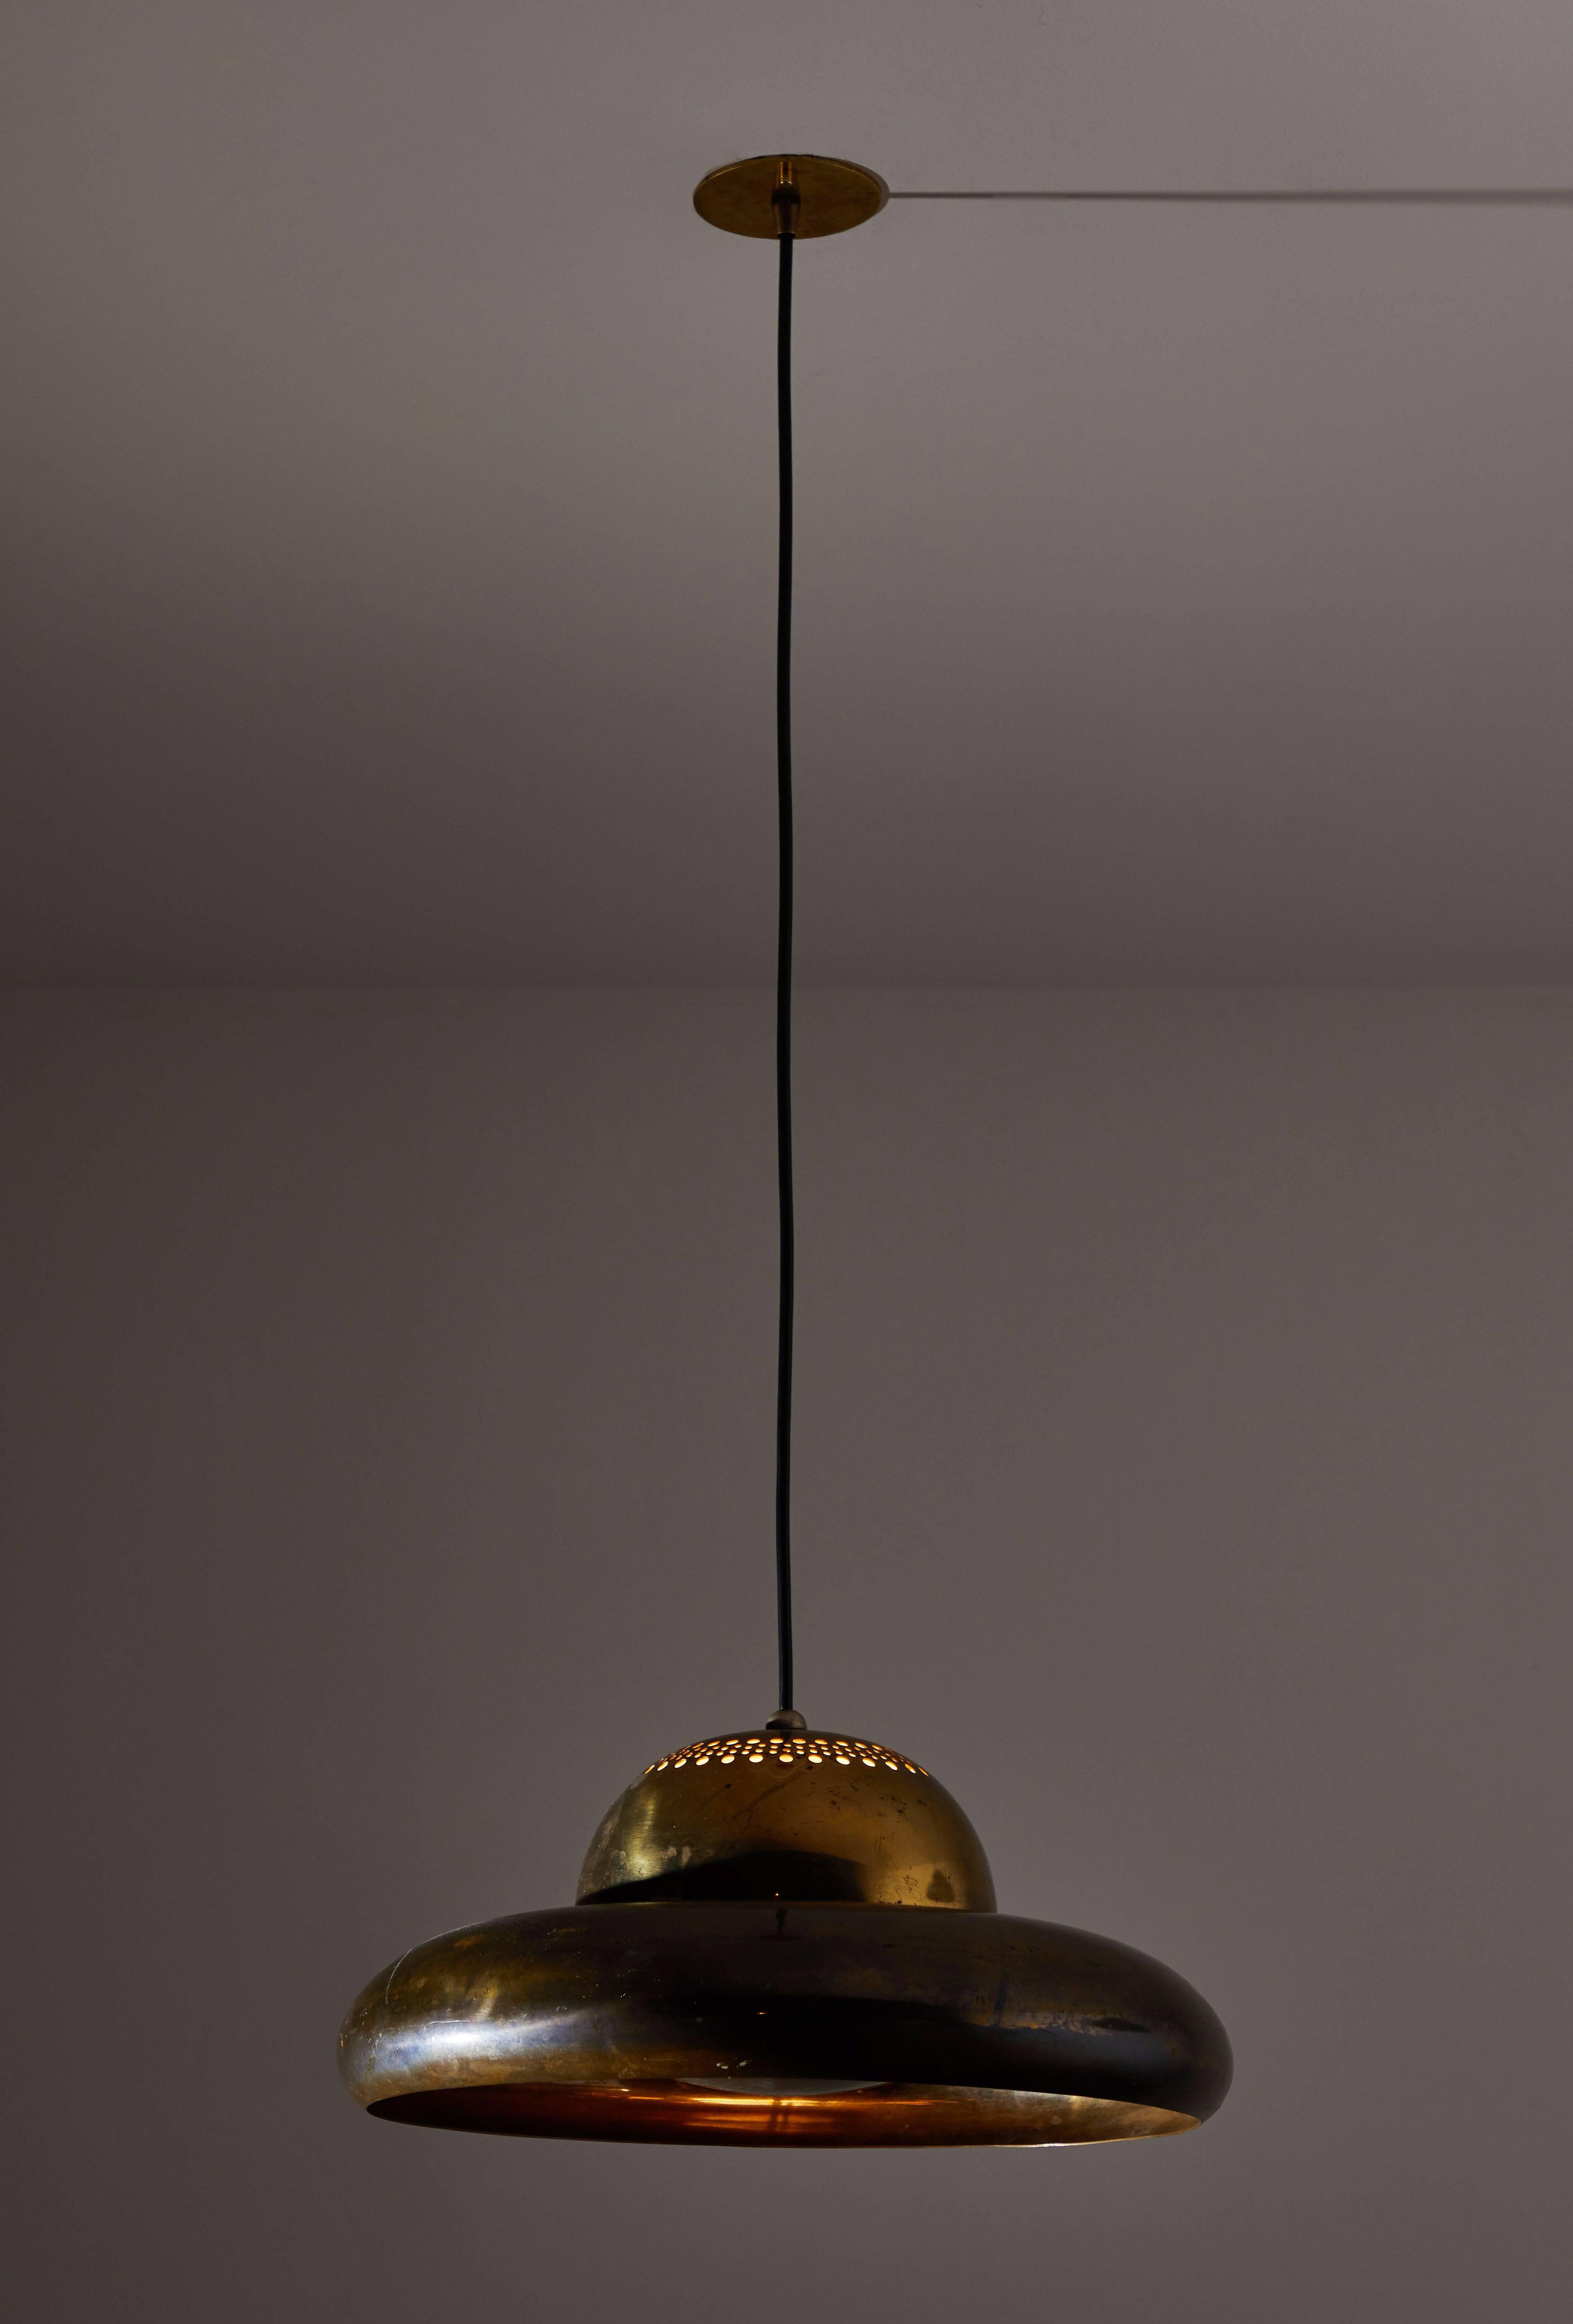 Rare Flor di Loto lotus flower pendant lamp. Designed by Afra & Tobia Scarpa and manufactured by Flos in Italy, 1961. Brass perforated pendant. No longer in production. Wired for US junction boxes. Takes one E27 100w maximum bulb. Overall drop can